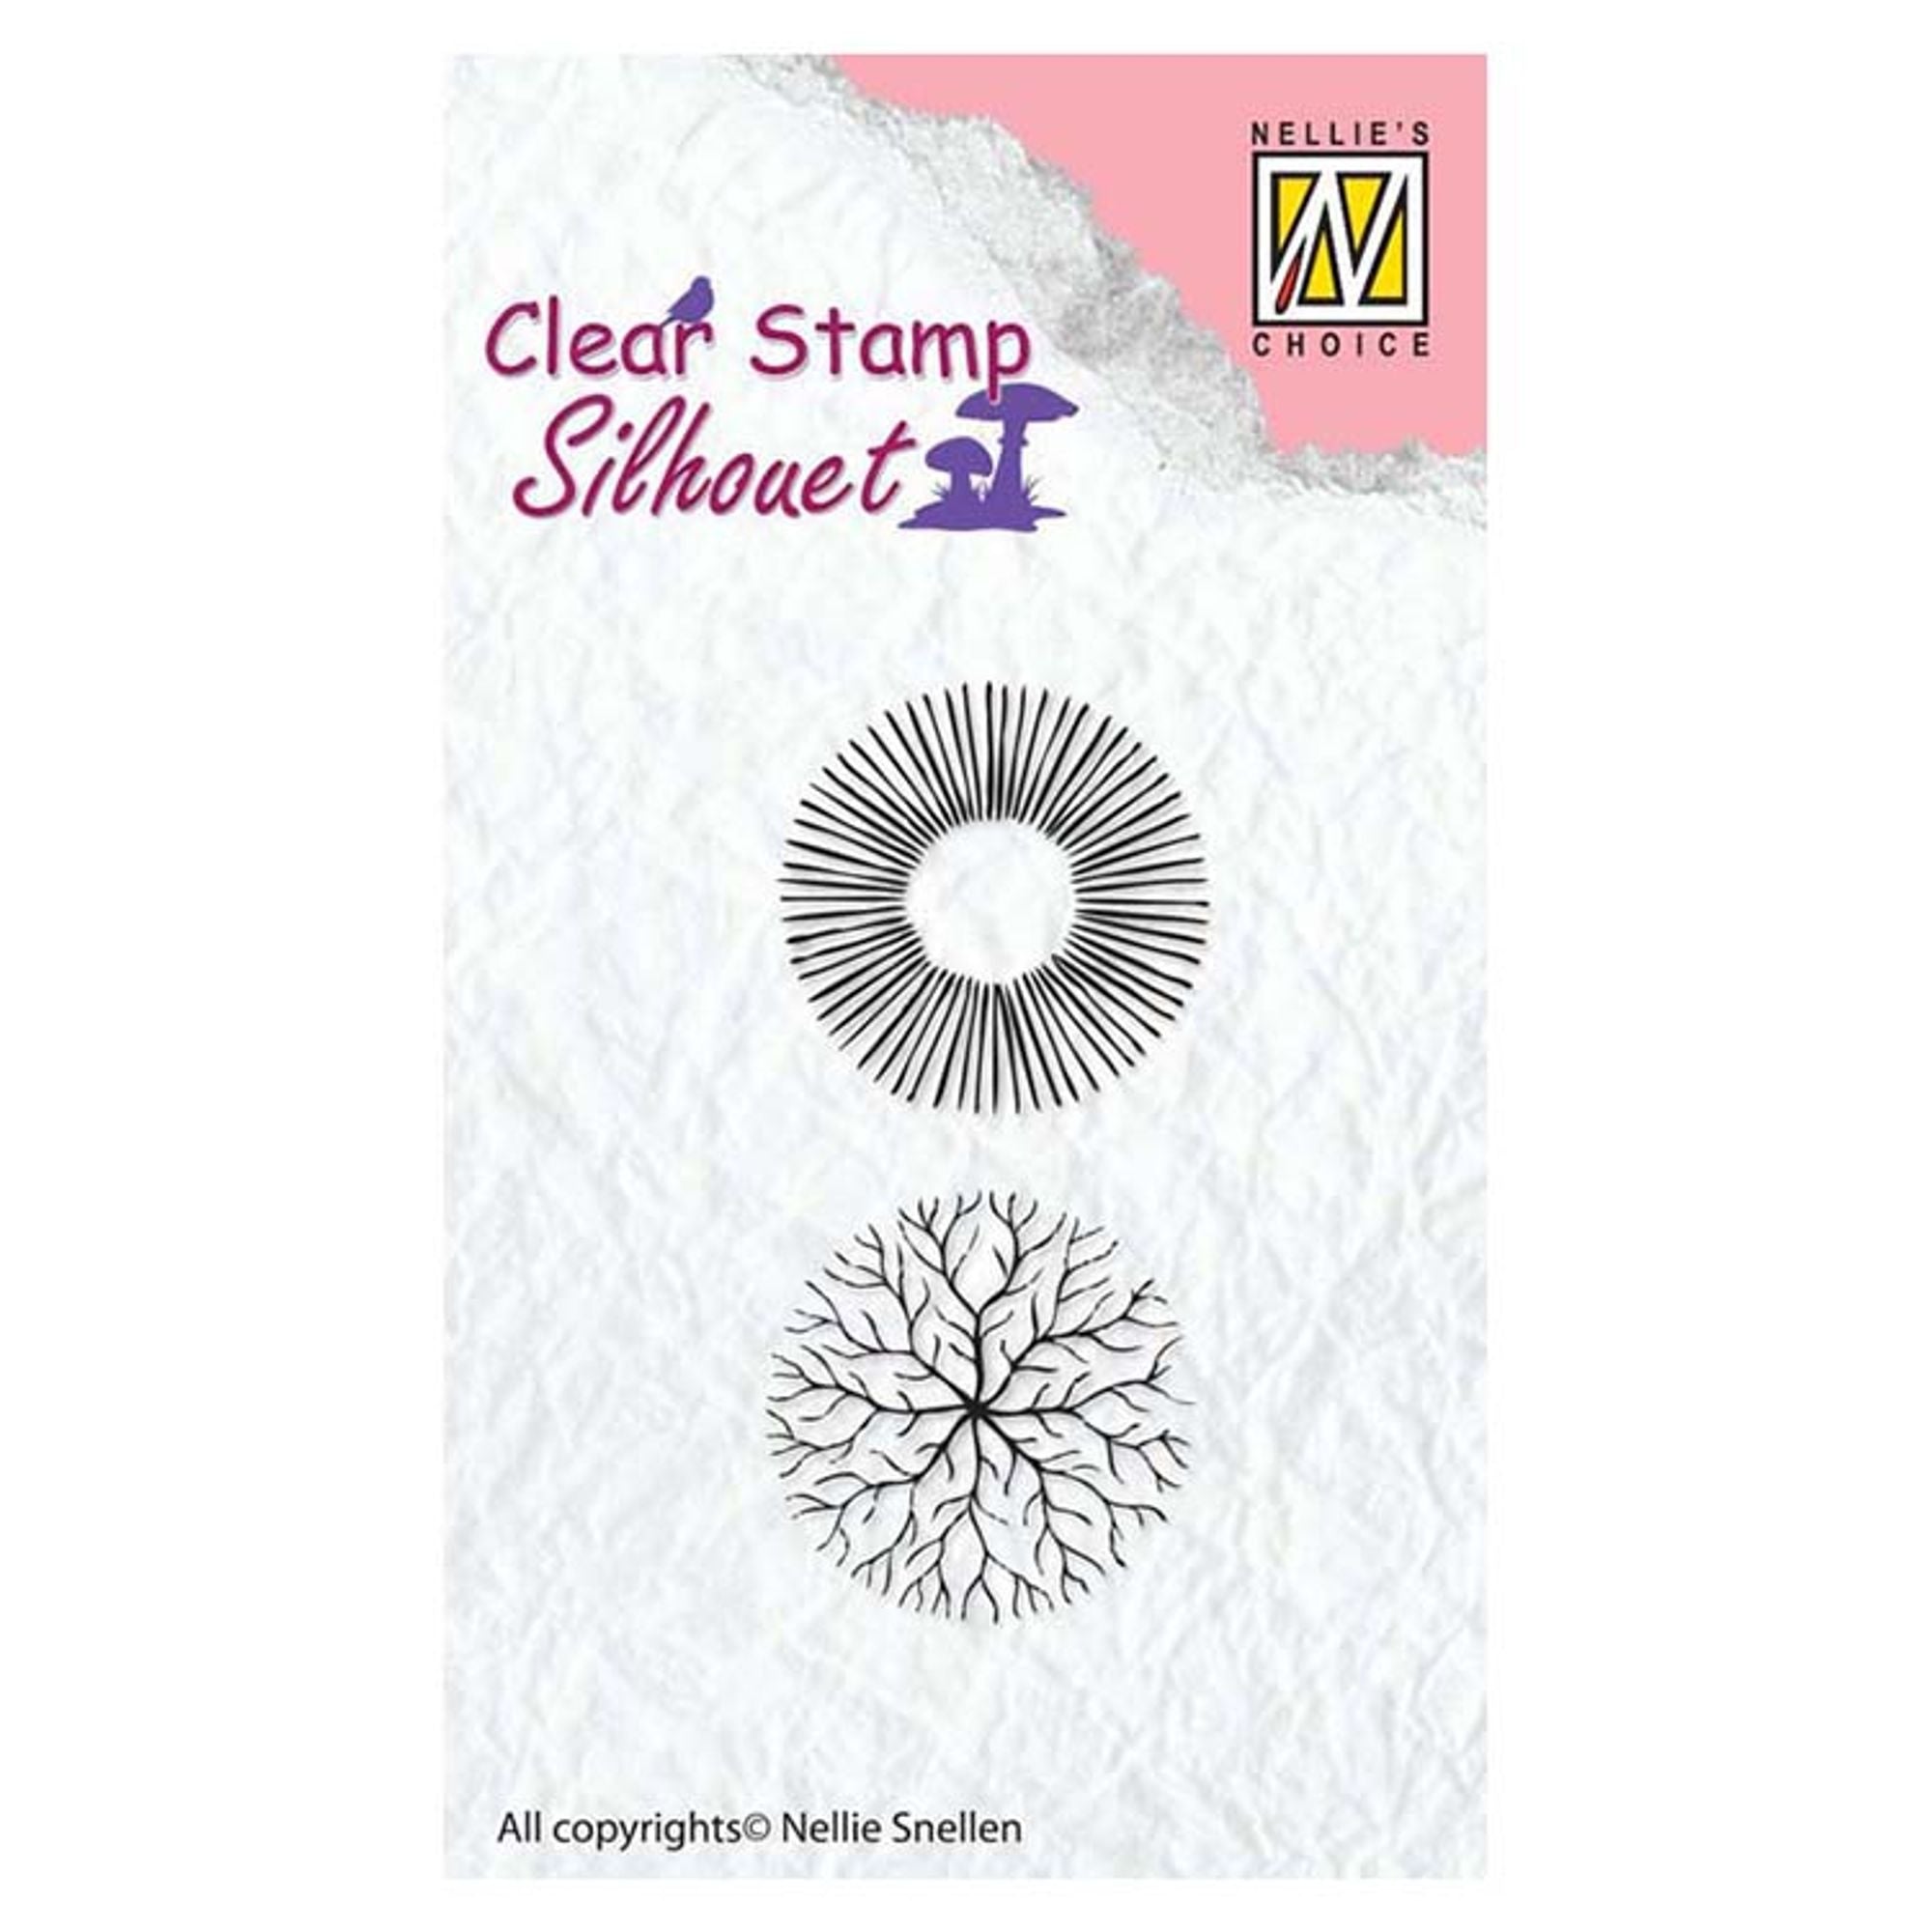 Nellie's Choice - Clear Stamp Flowers 17